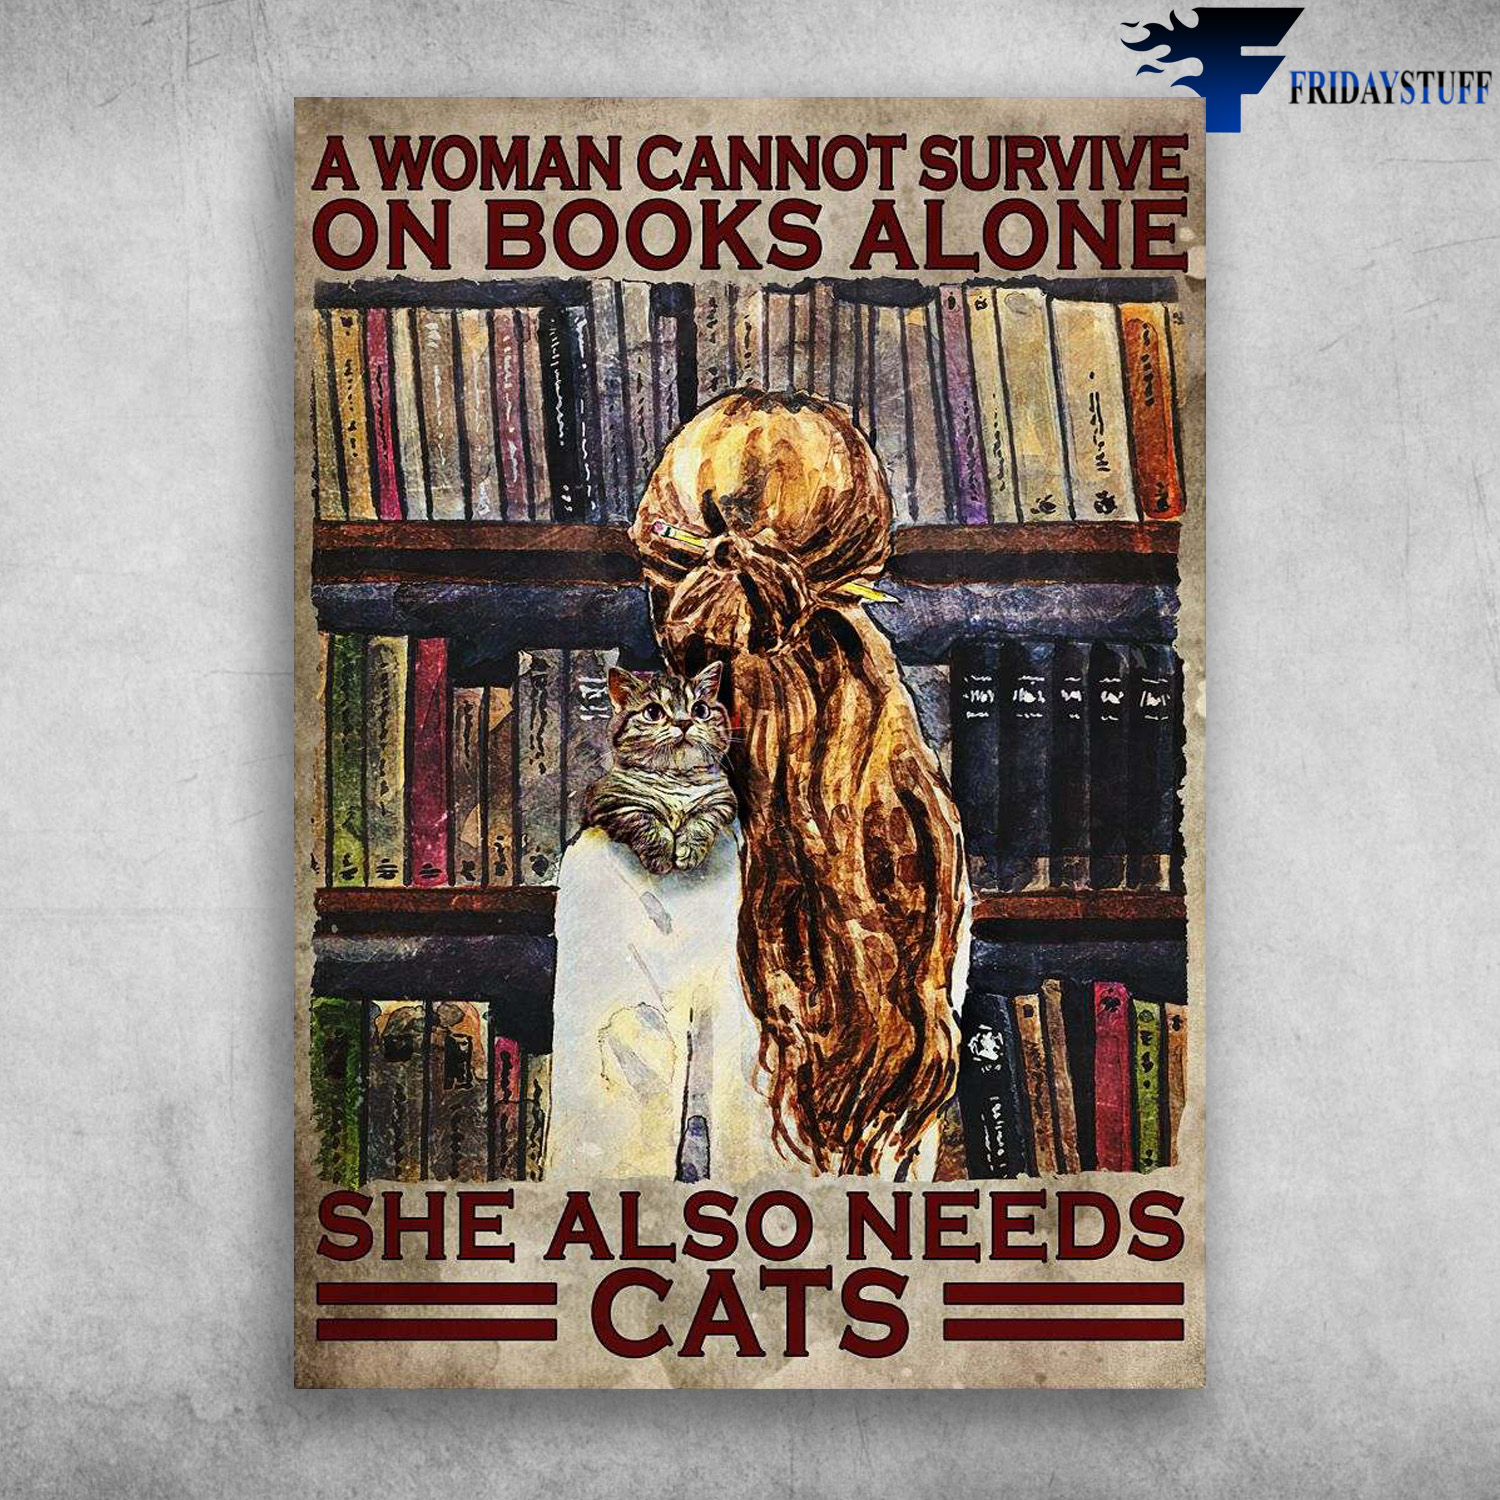 Girl Library, Cat And Book - A Woman Cannot Suvive On Books Alone, She Also Needs Cats